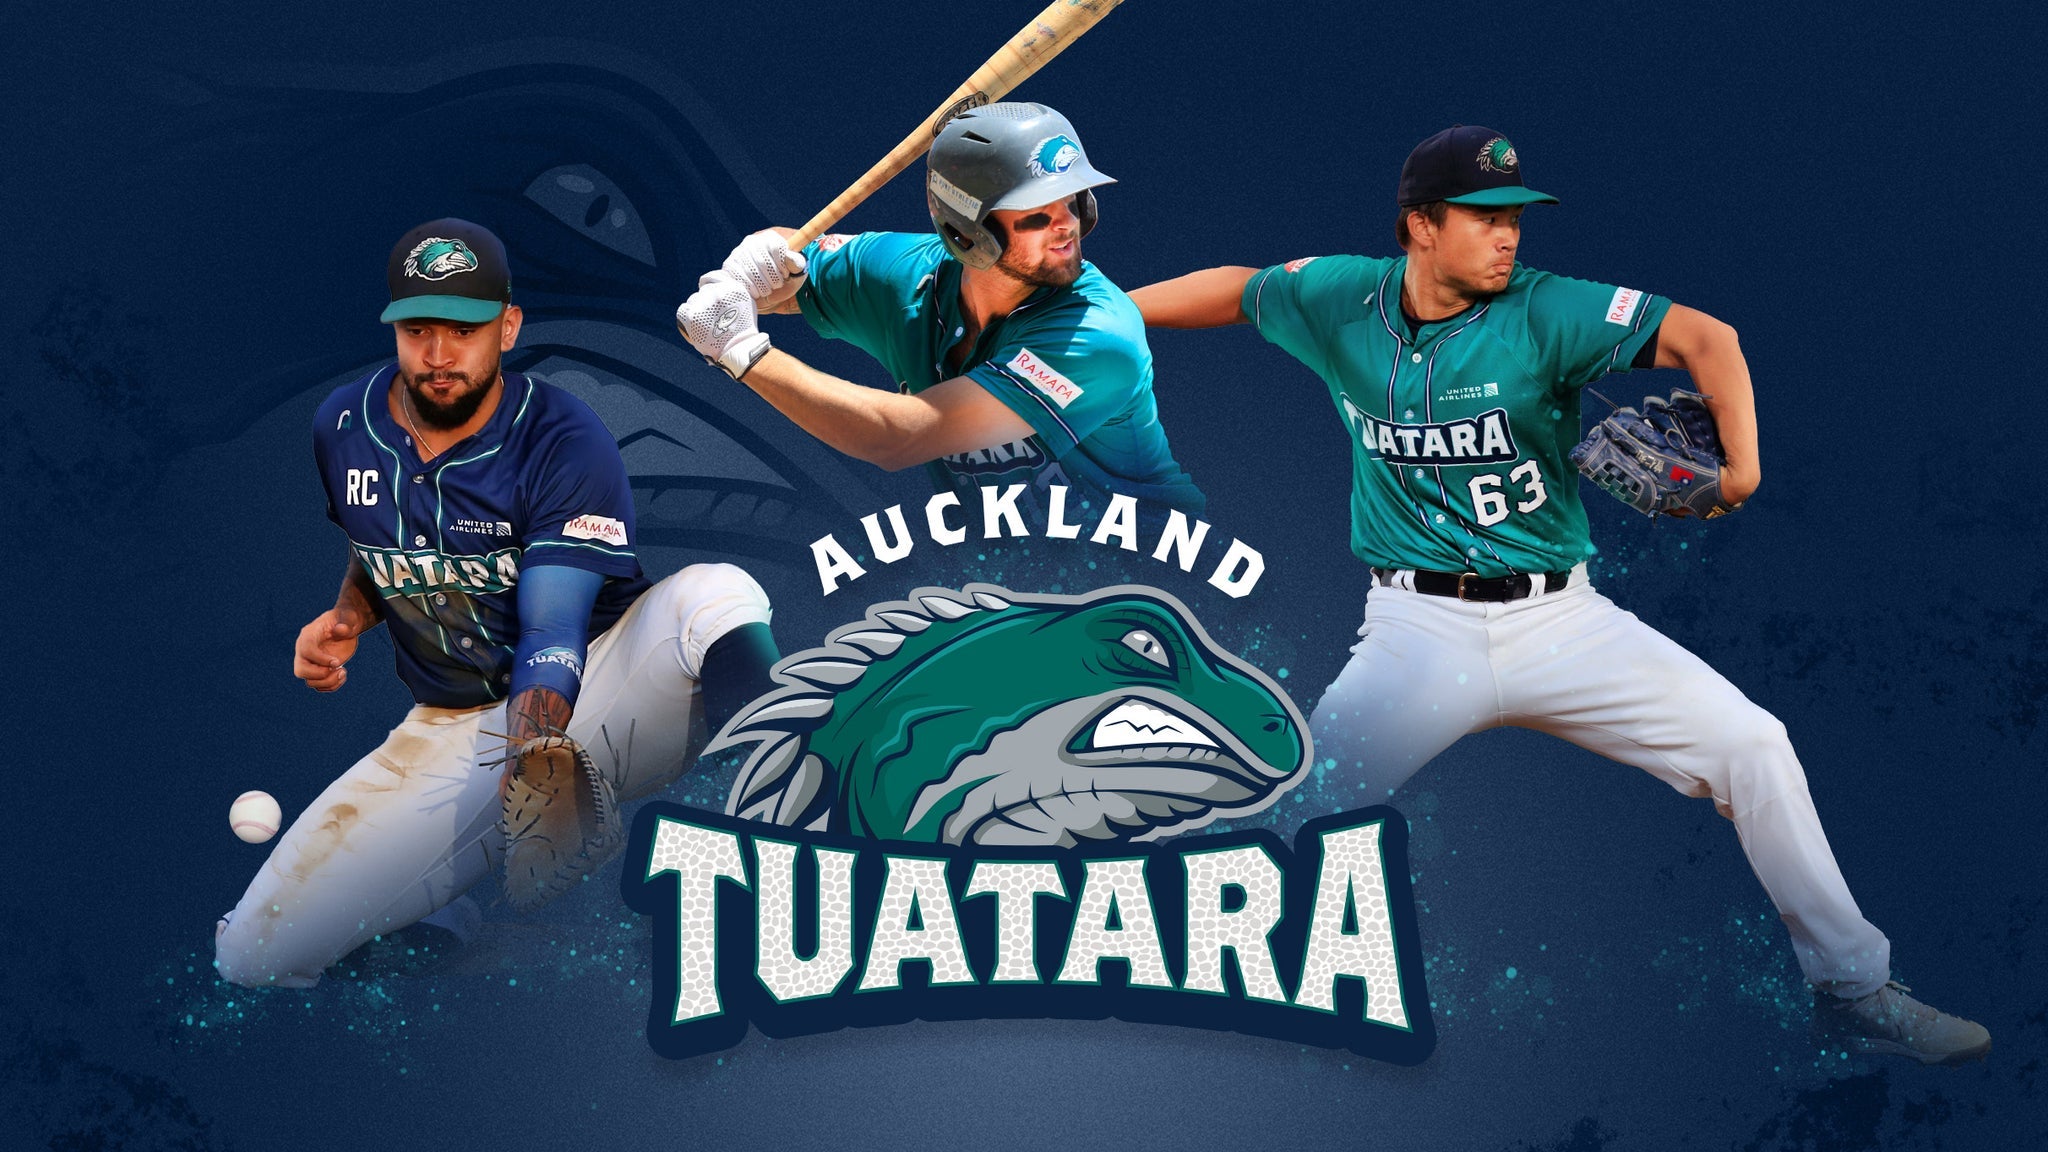 Image used with permission from Ticketmaster | Auckland Tuatara - Full Season Membership (20 Games) tickets